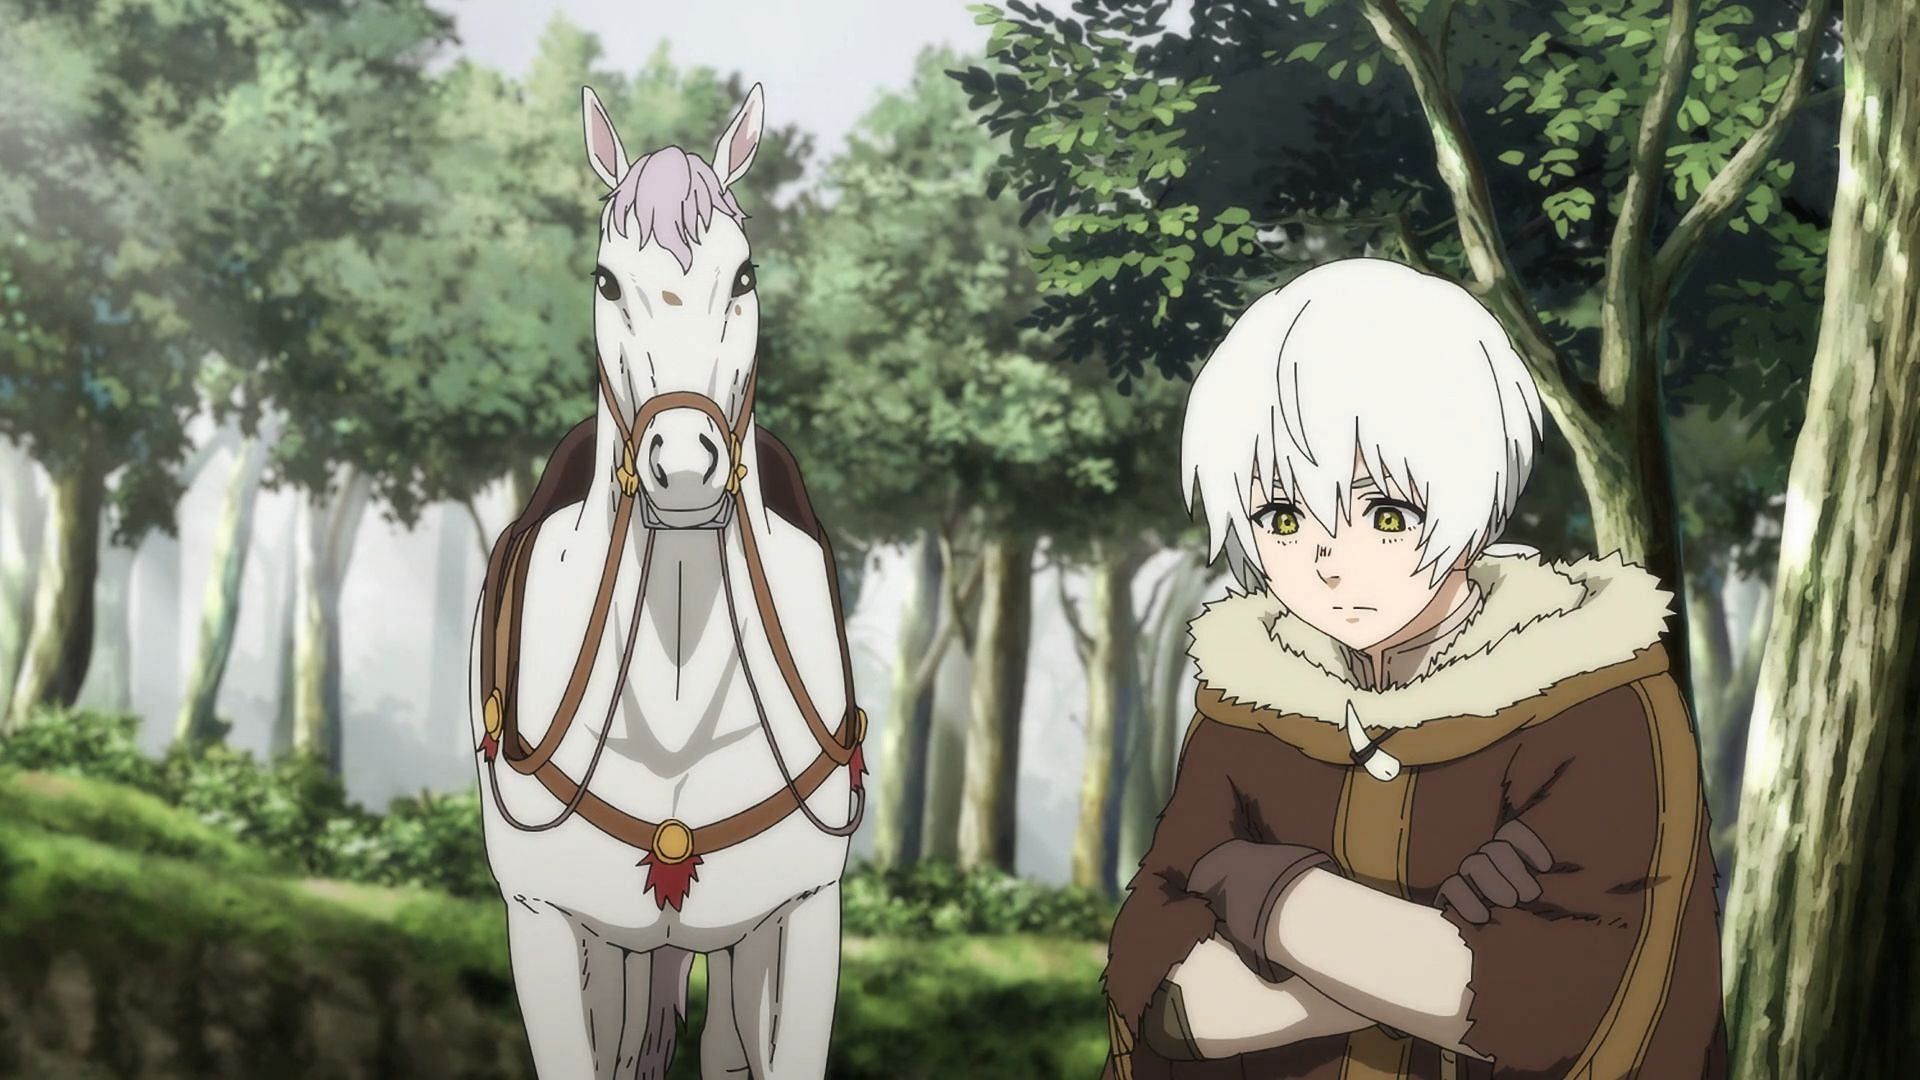 Fushi and Horse as seen in the anime (Image via Studio Drive)